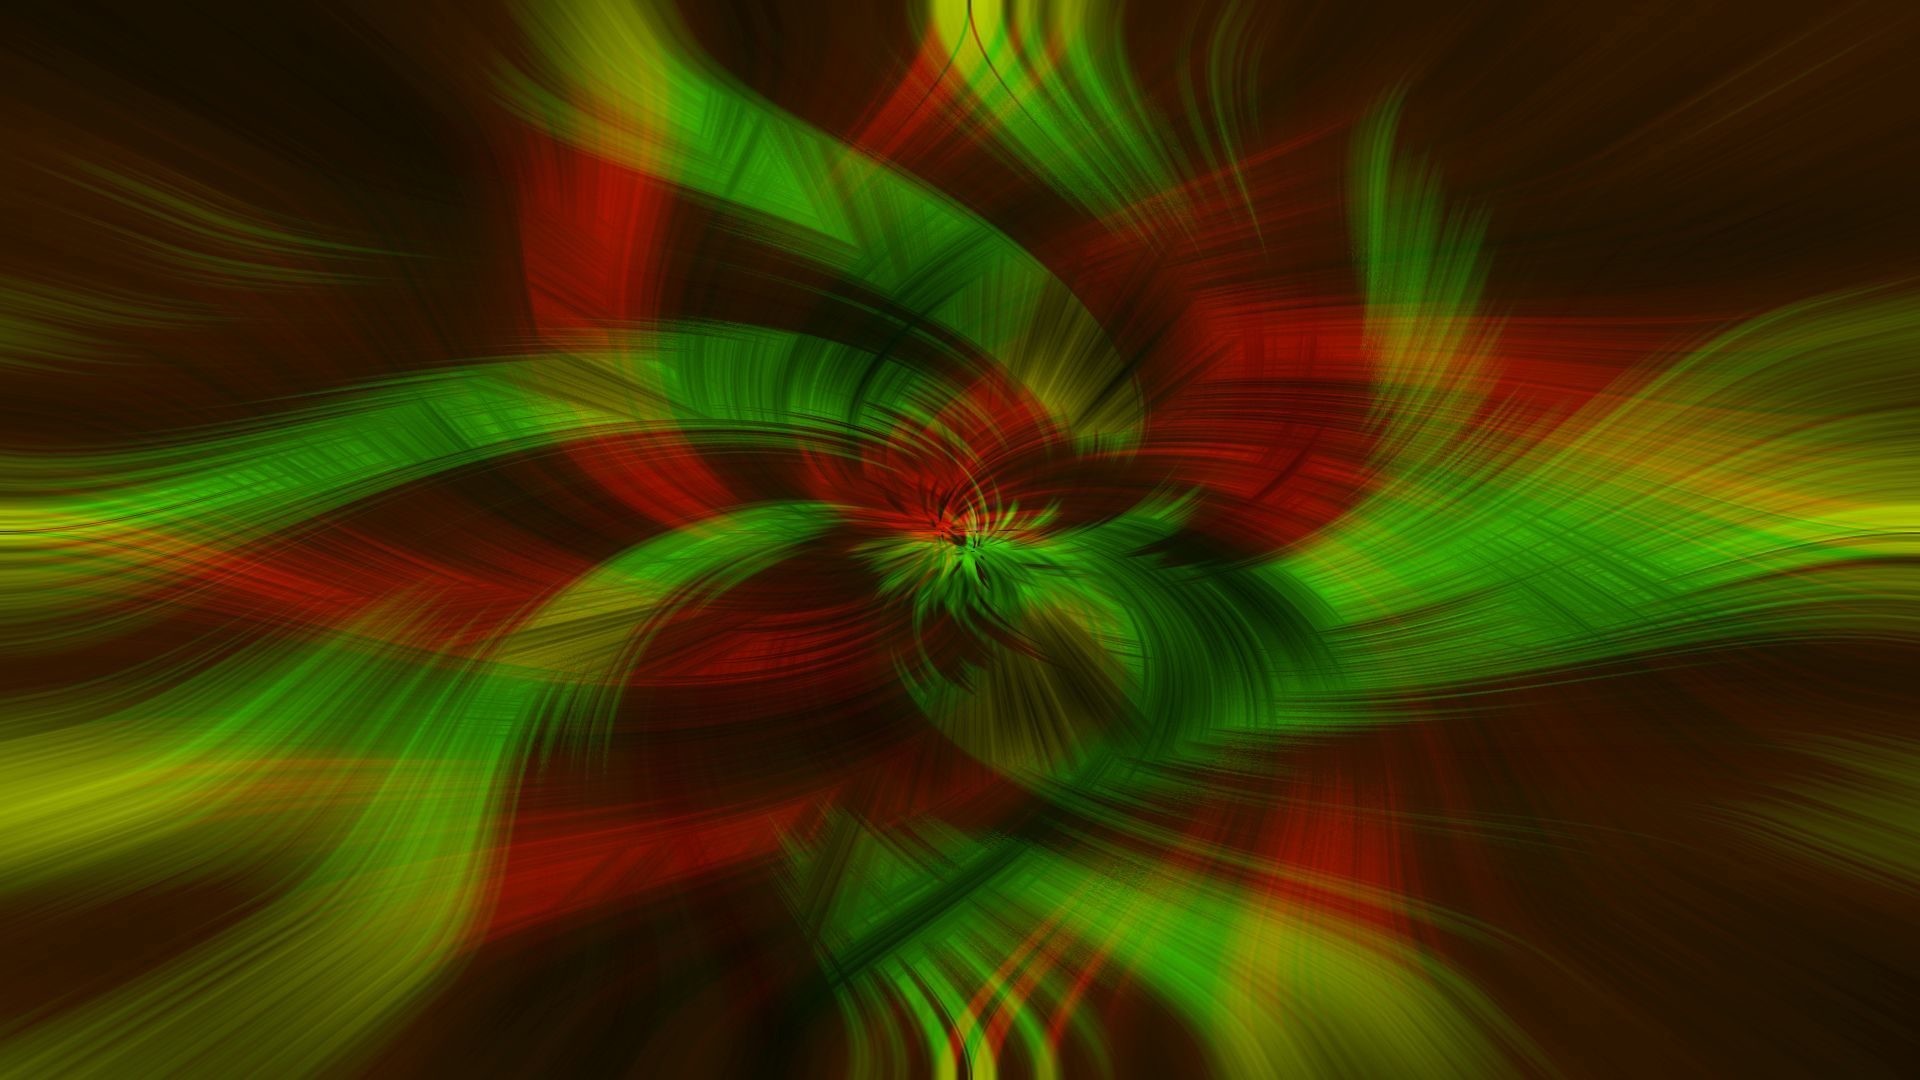 1920x1080 red and green shaped lines abstract hd wallpaper 1920Ã1080 11572. Â«Â«